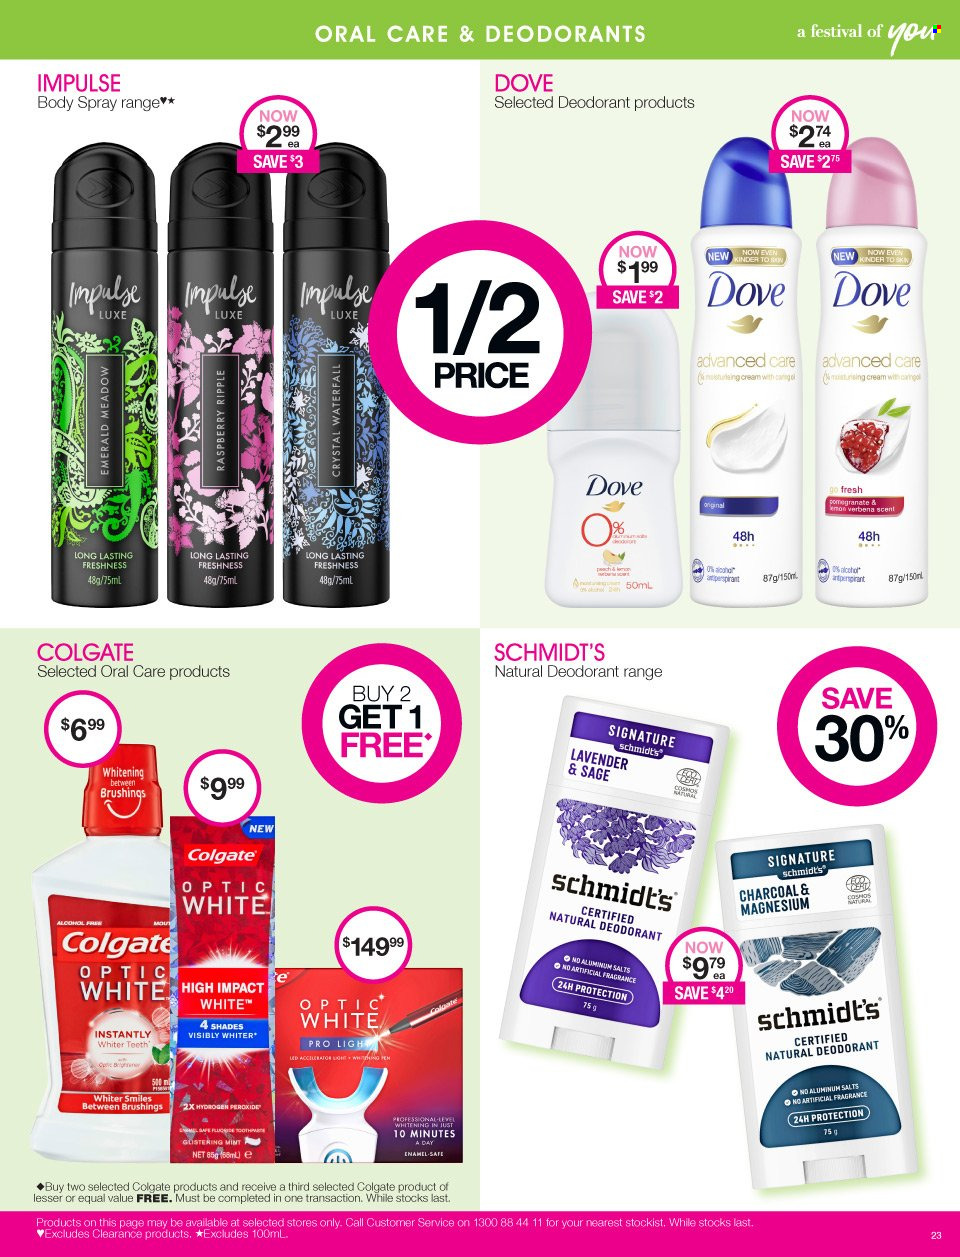 thumbnail - Priceline Pharmacy Catalogue - 21 Jan 2022 - 2 Feb 2022 - Sales products - Dove, Colgate, body spray, anti-perspirant, fragrance, deodorant, shades, magnesium. Page 23.